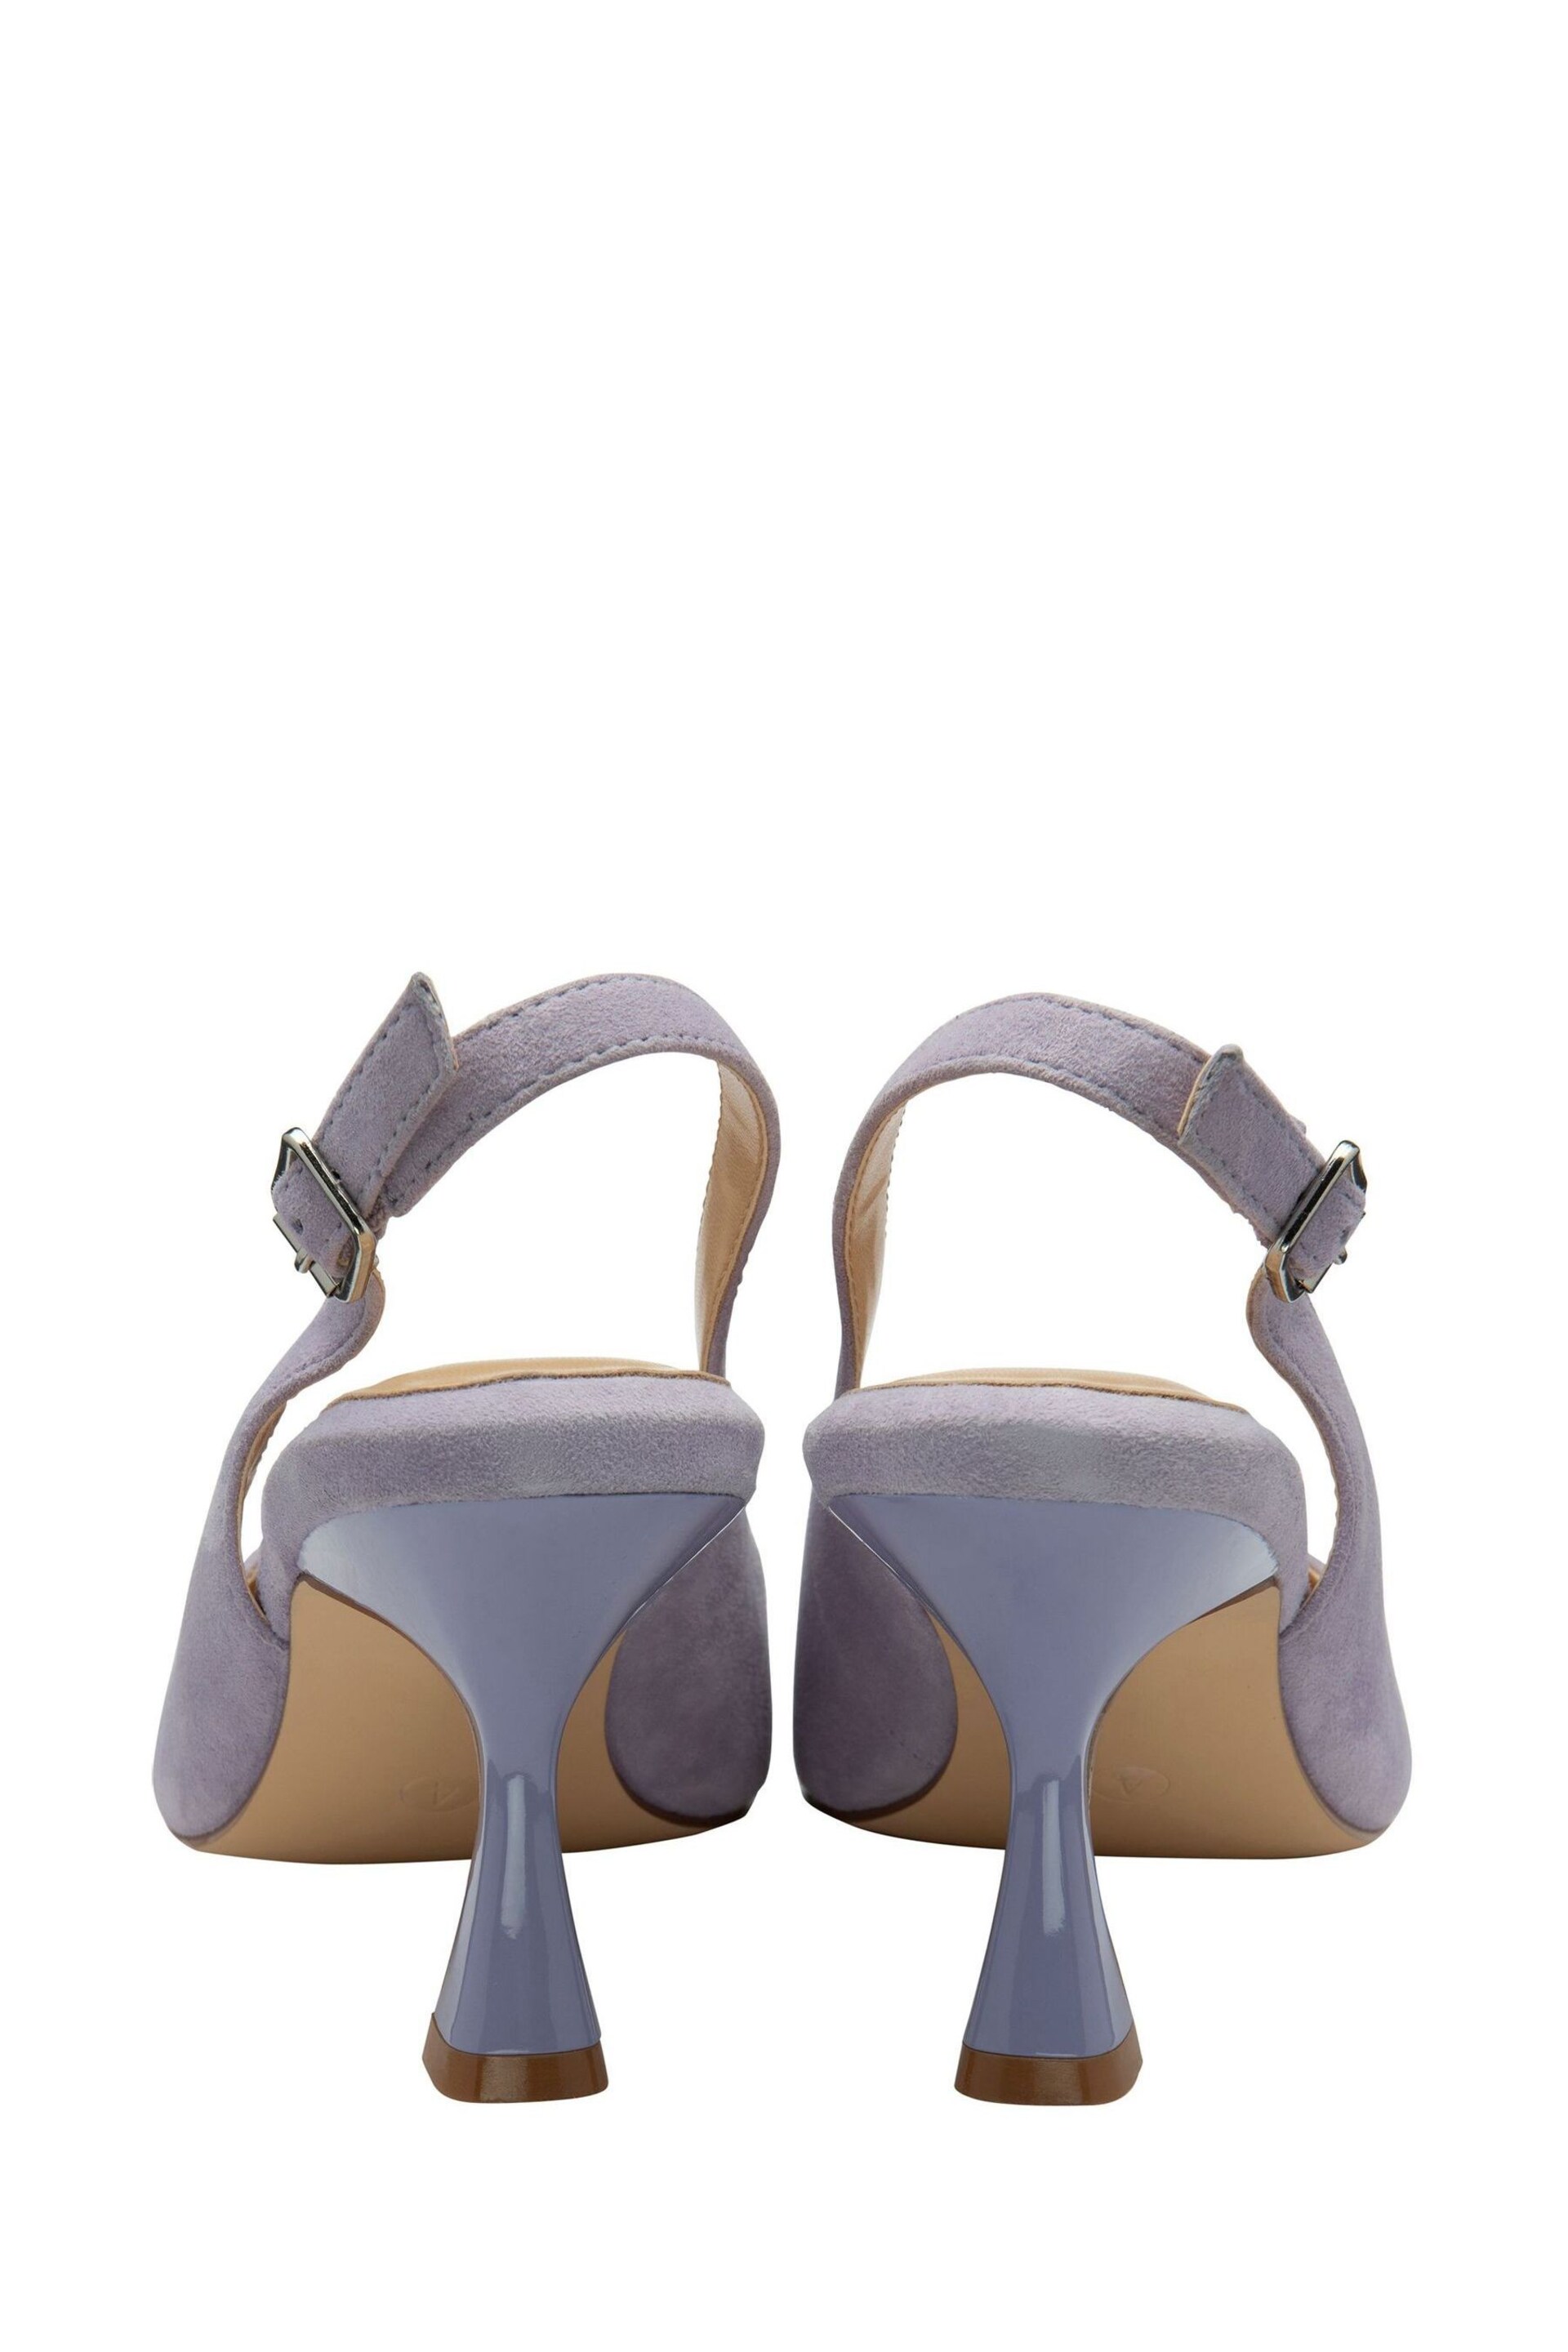 Lotus Purple Pointed-Toe Court Shoes - Image 3 of 4